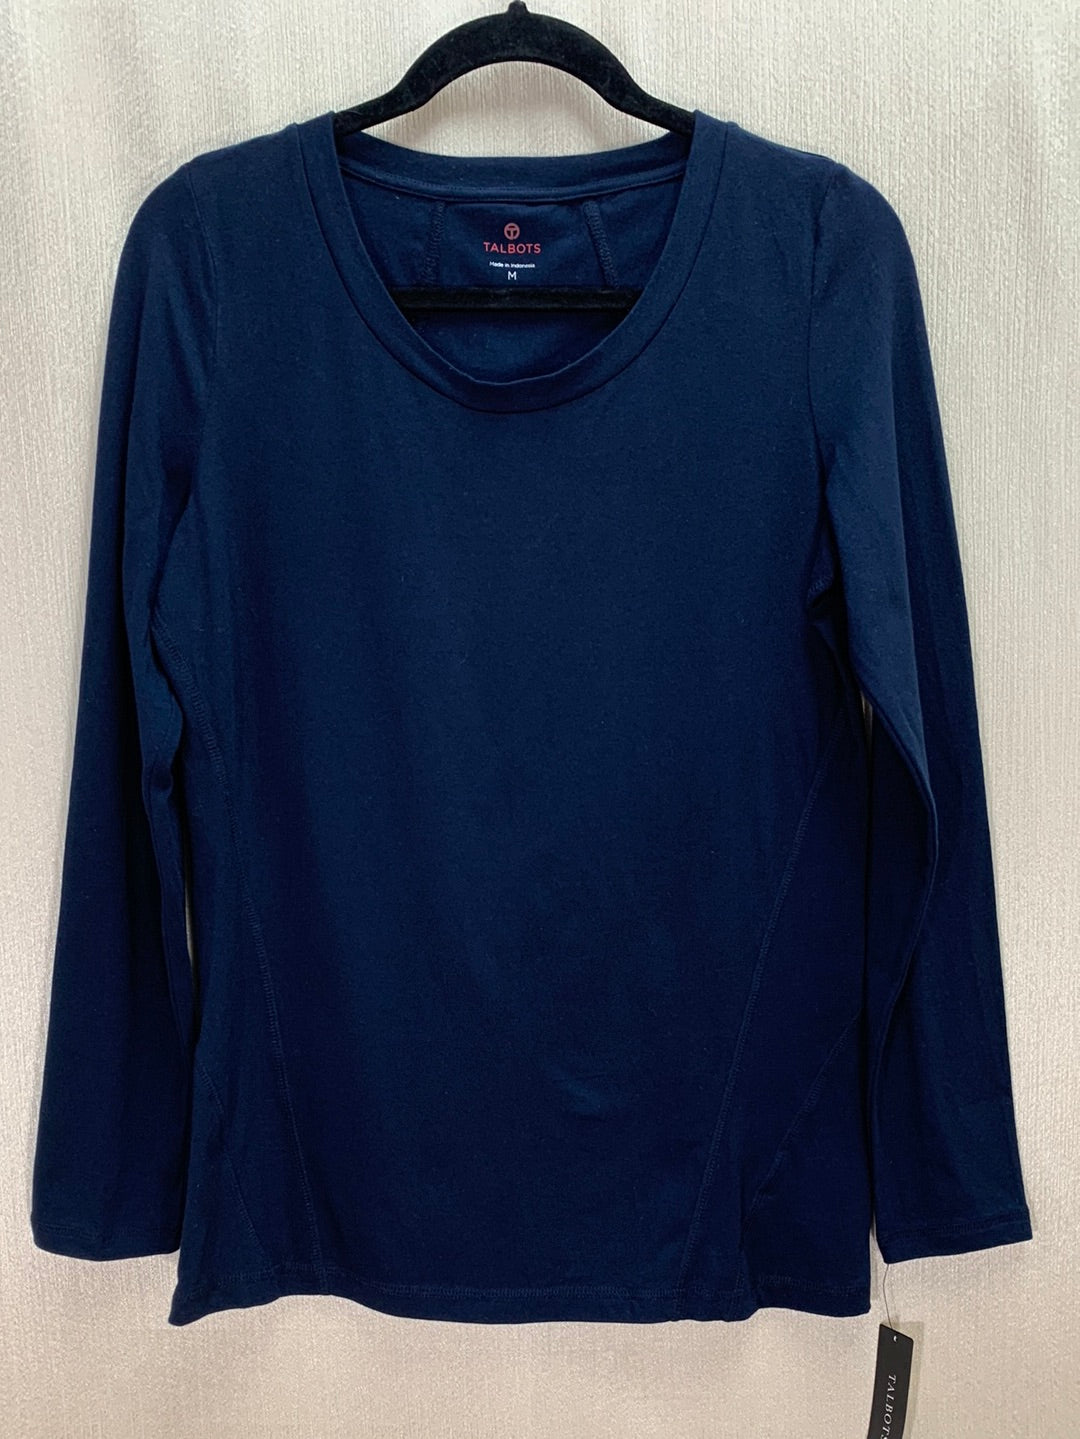 NWT - T by TALBOTS navy Cotton Modal Long Sleeve Top - M